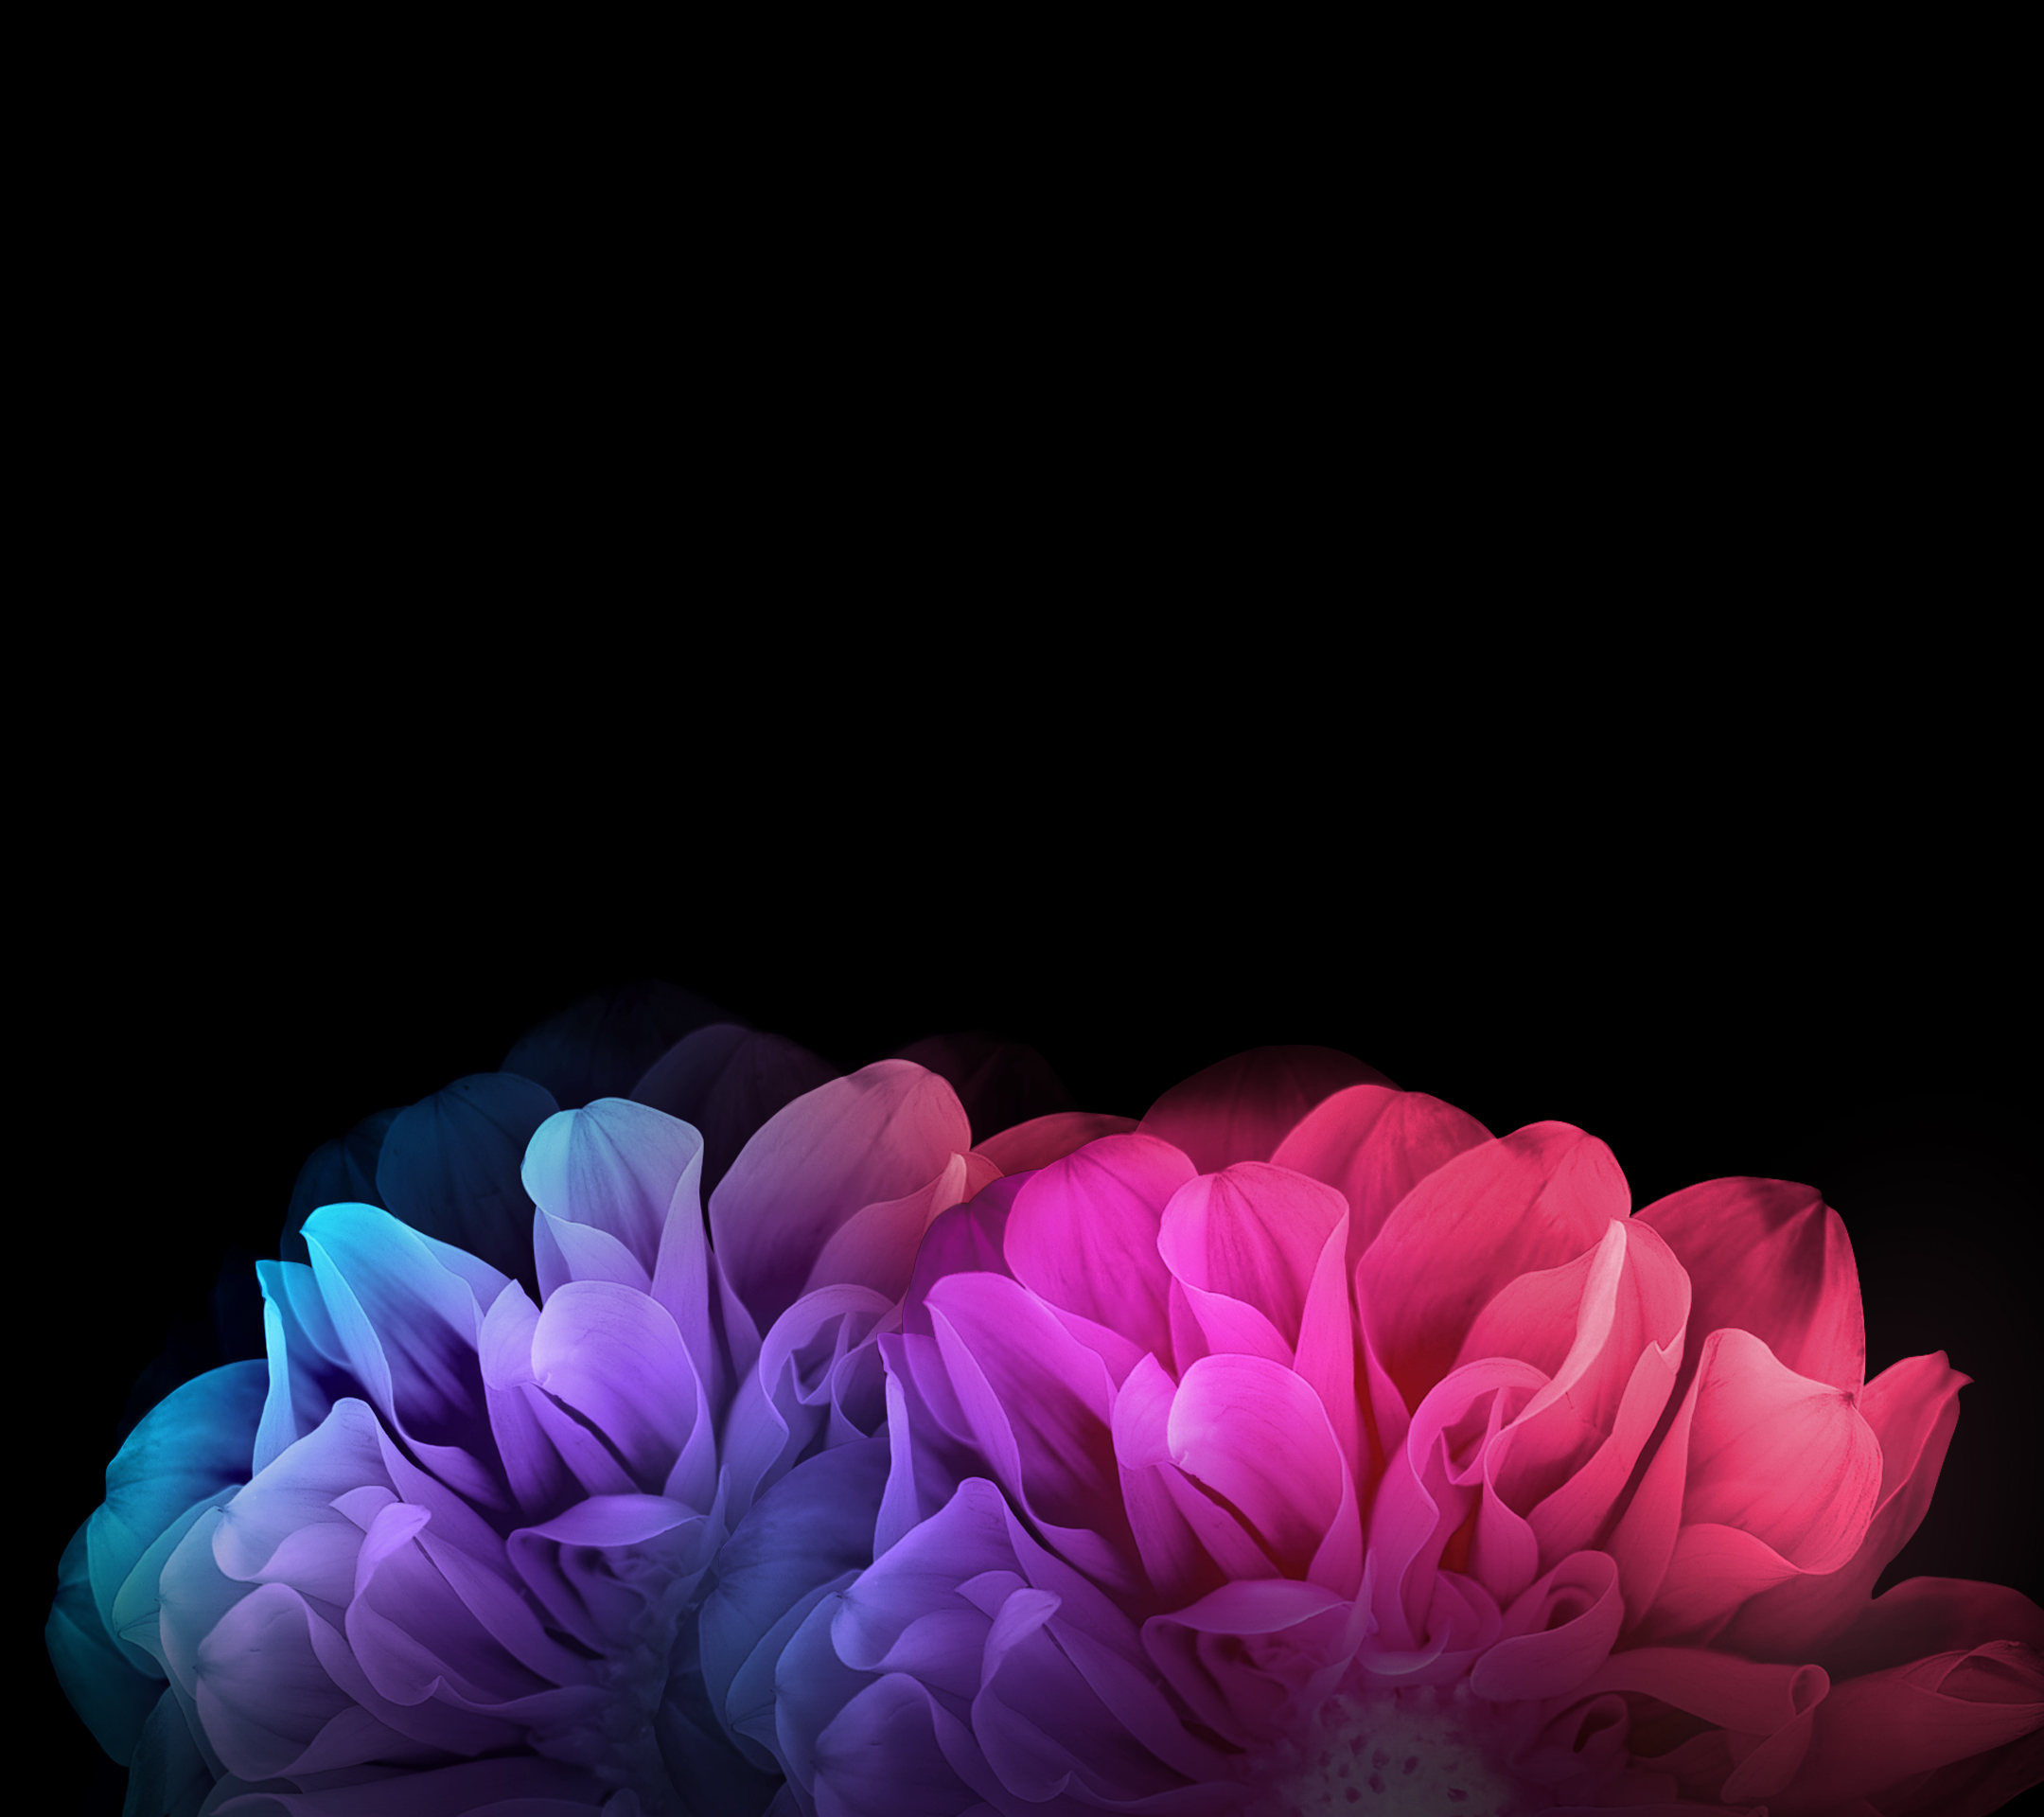 Download the LG G Flex 2 wallpapers for your Android | AndroidGuys